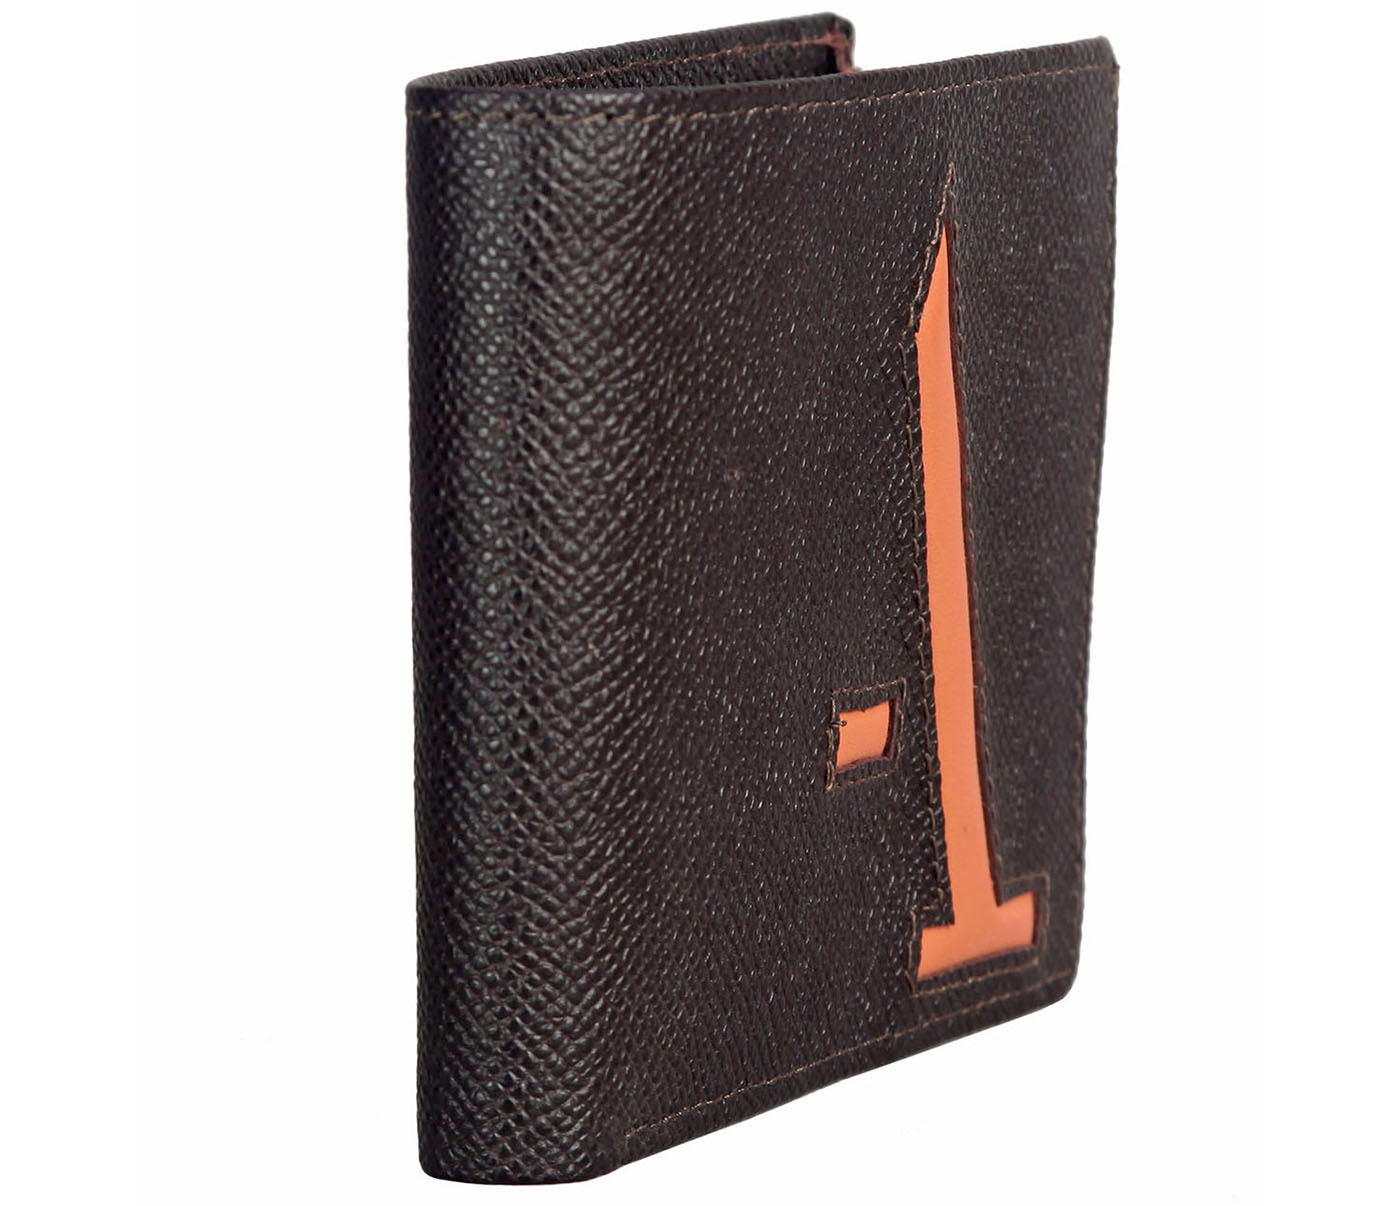 W310-Addler-Men's bifold wallet with coin pocket in Genuine Leather - Brown